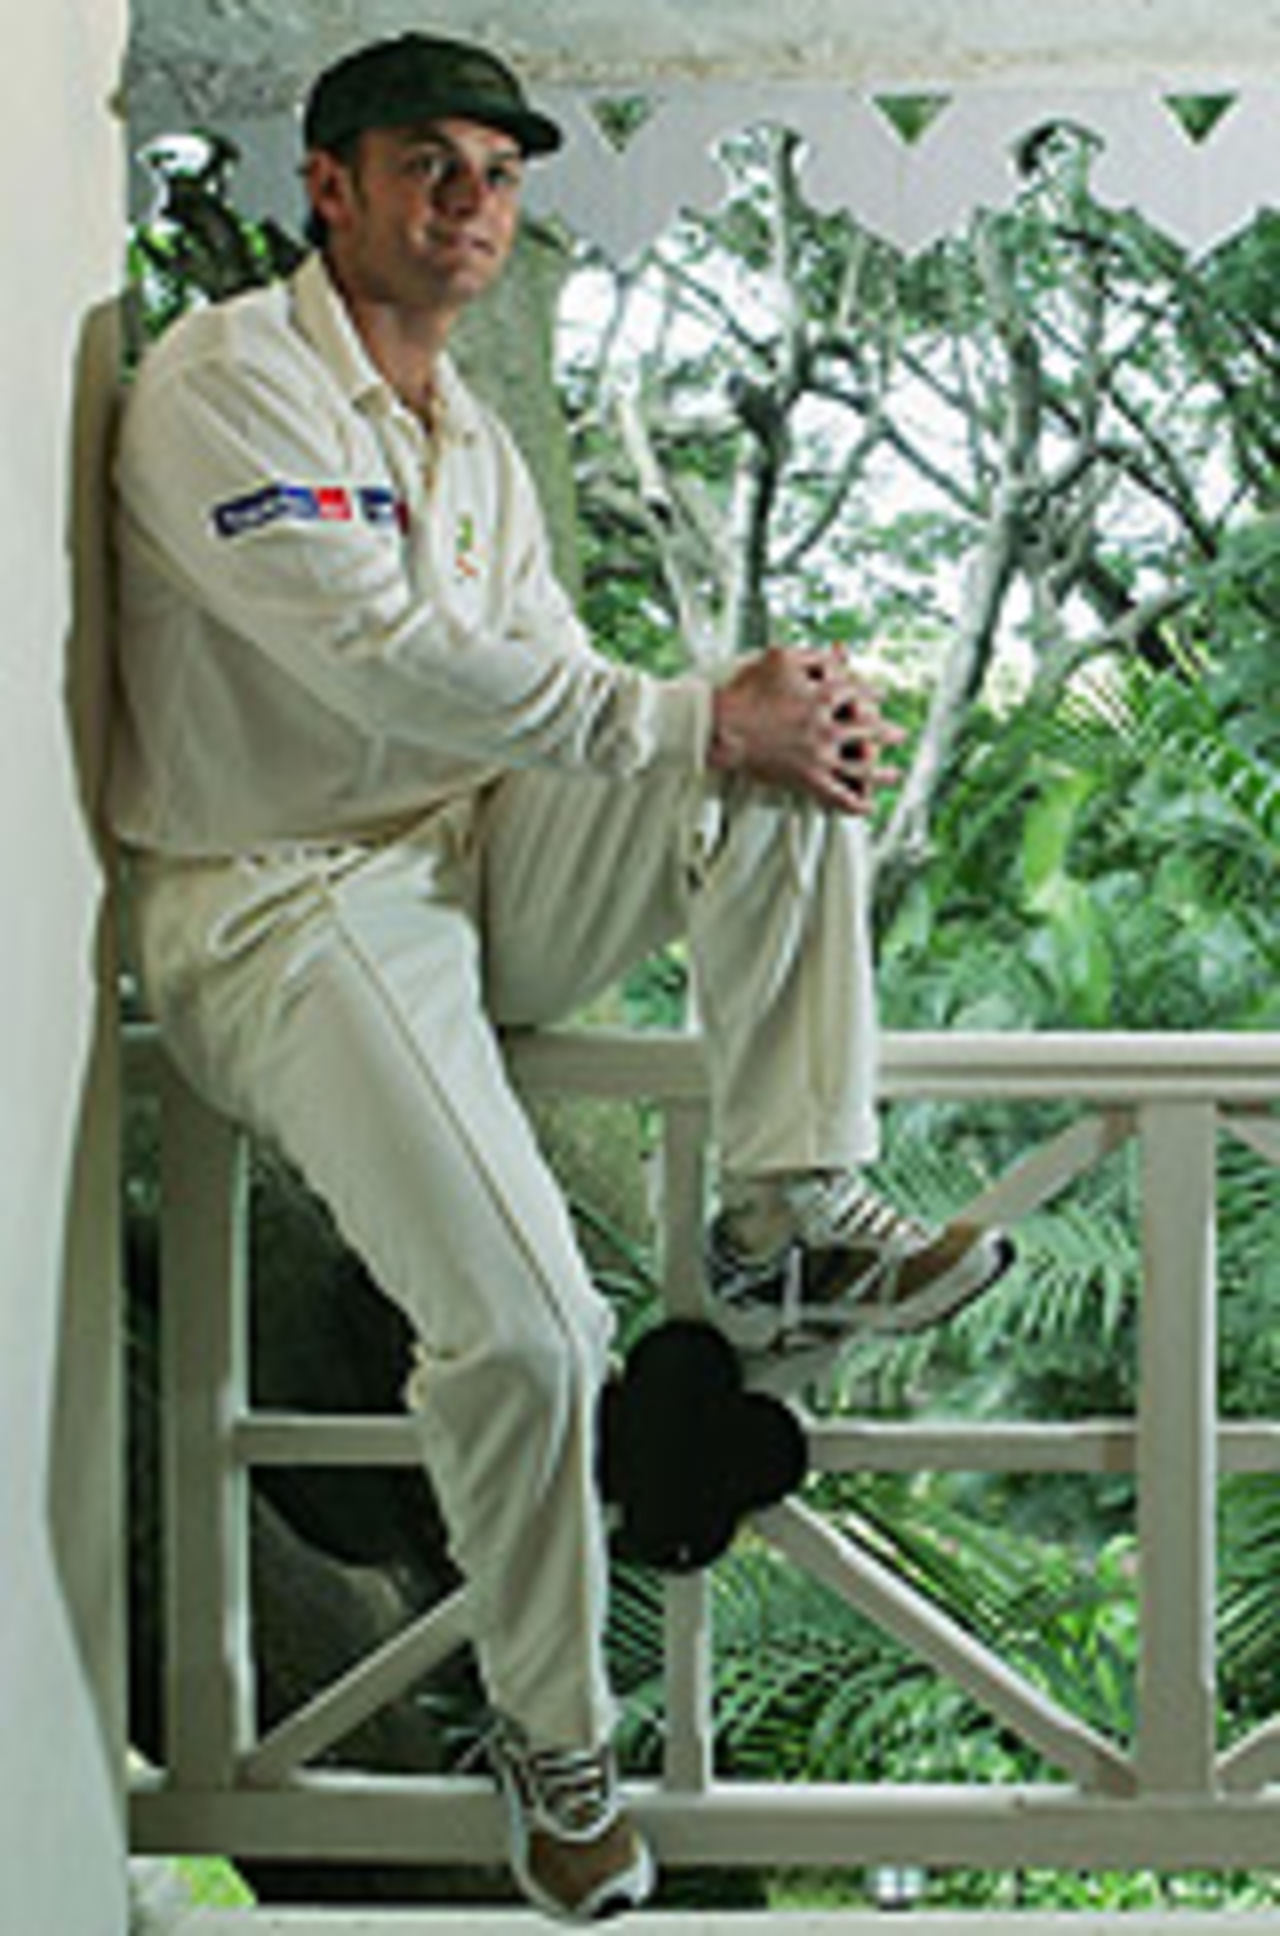 Adam Gilchrist poses on the balcony at the team hotel, as Australia prepare for the first Test against India at Bangalore, October 4, 2004